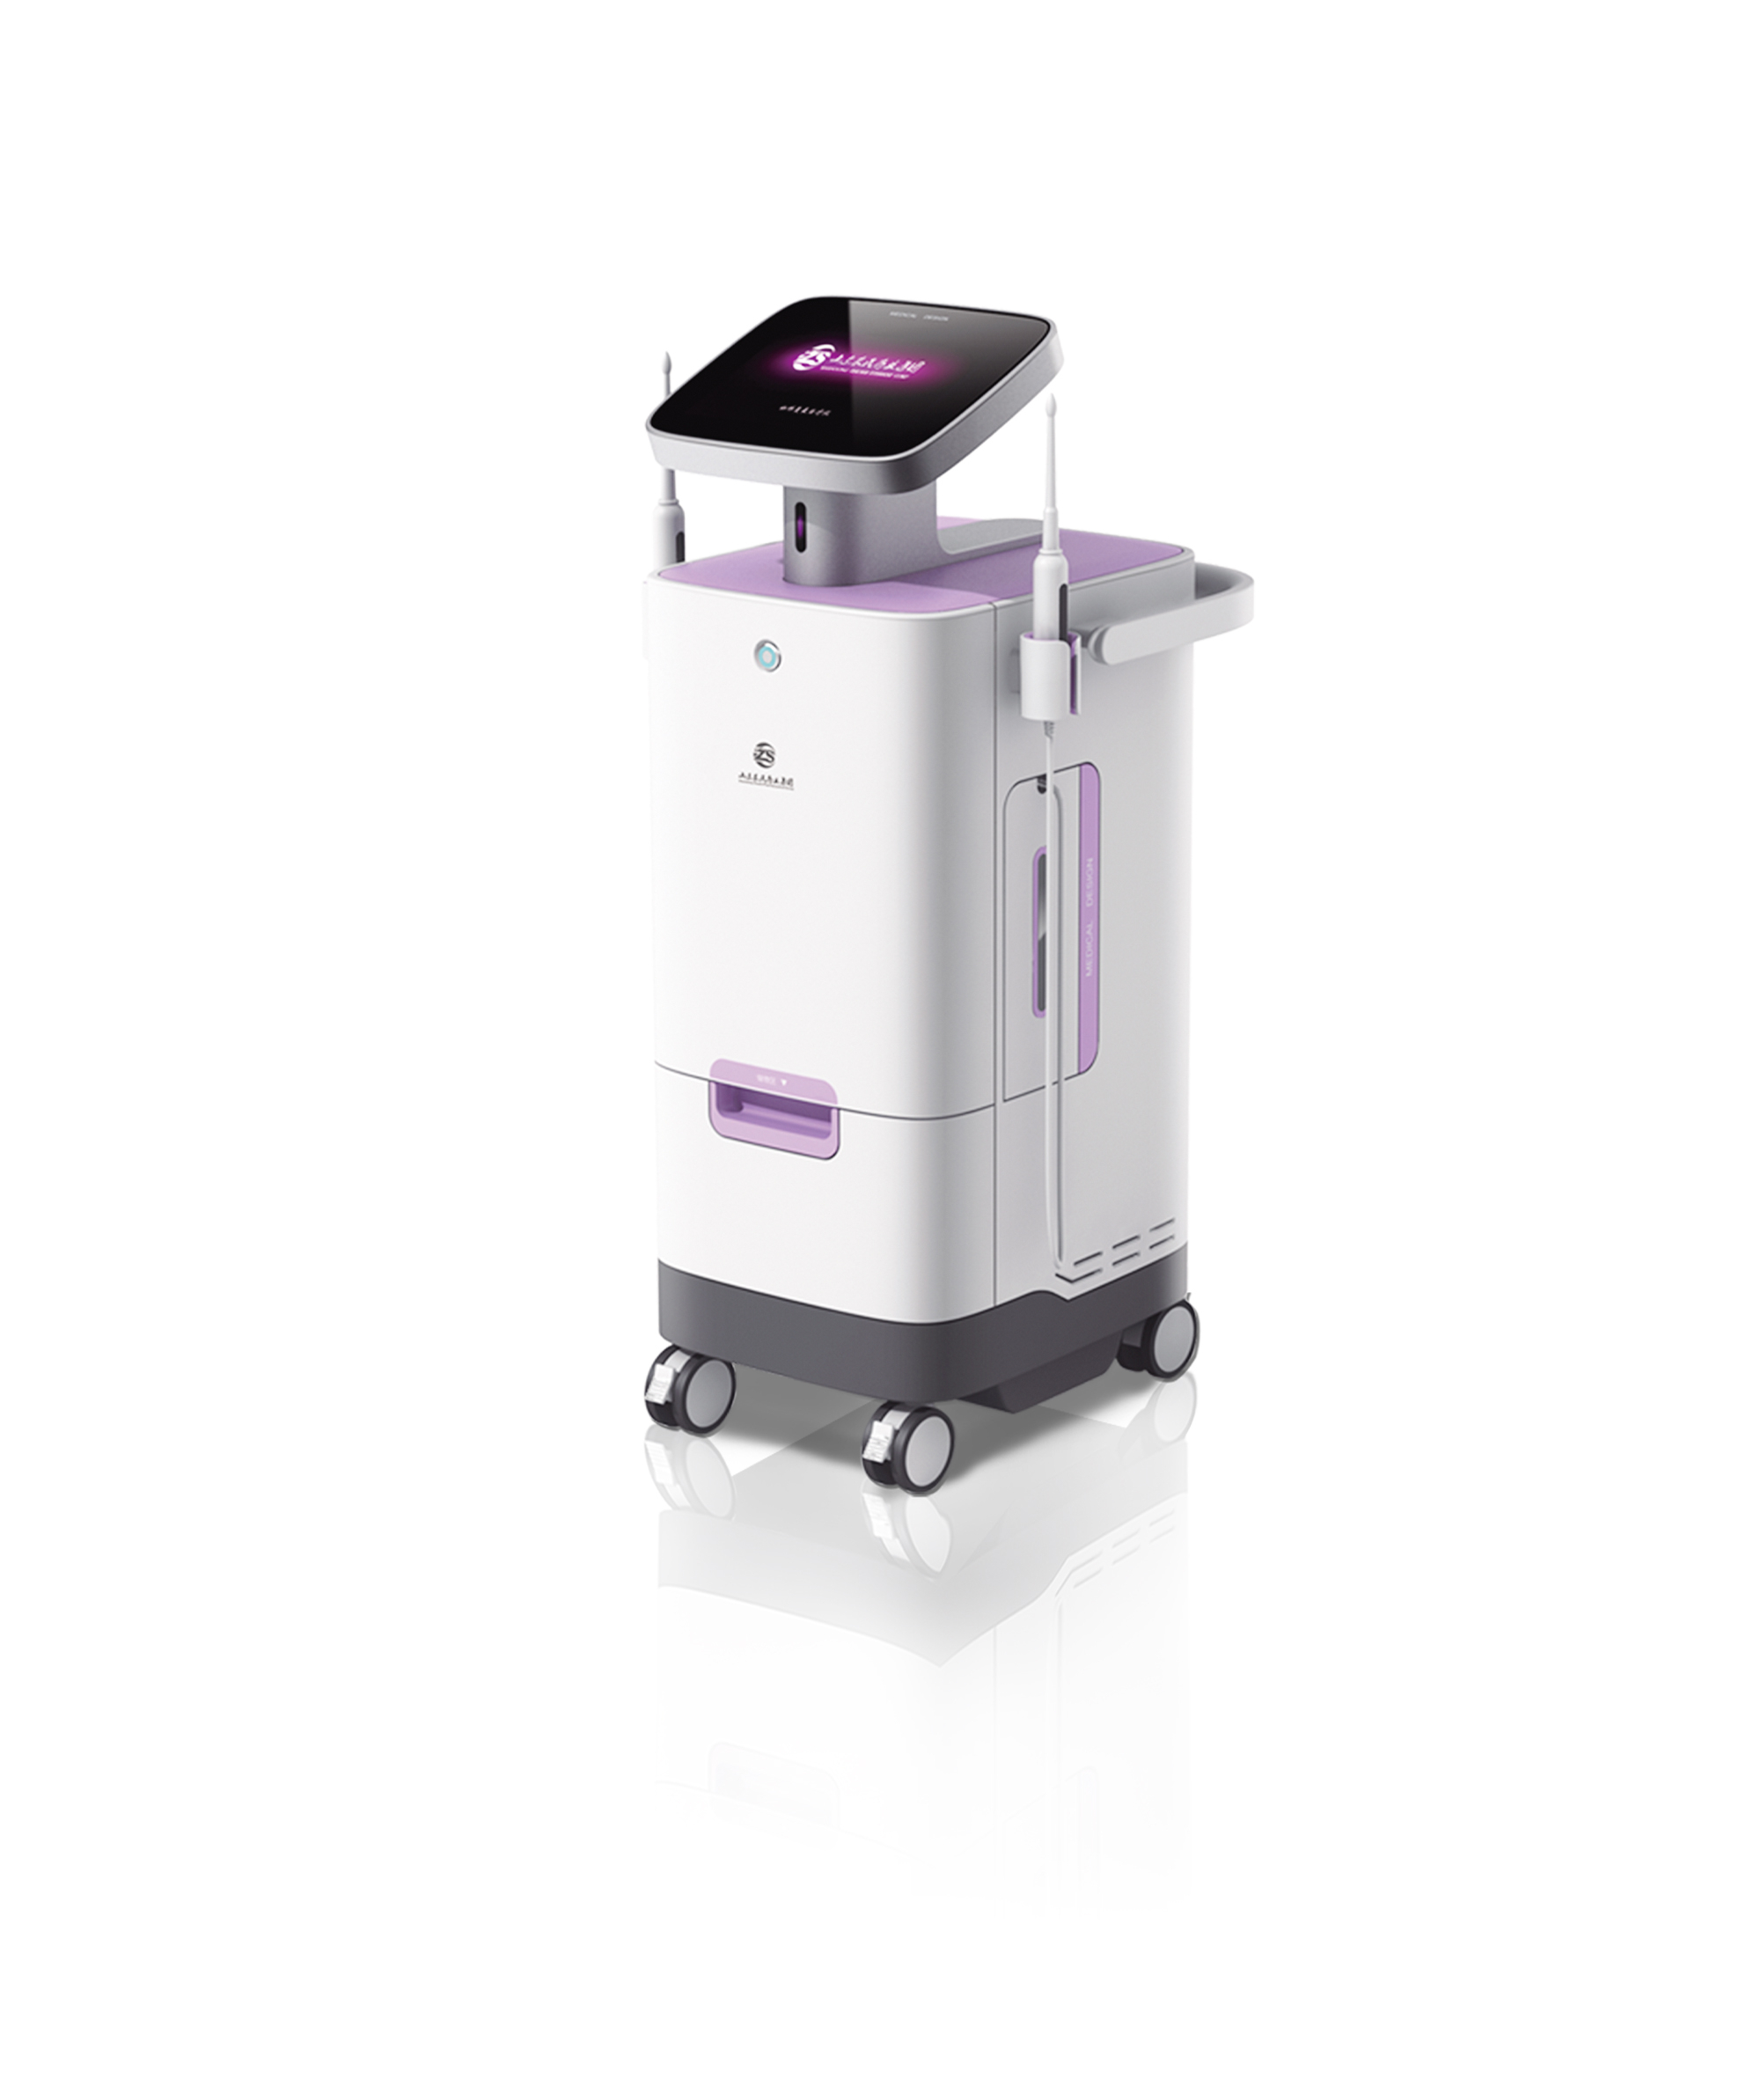 Medical disinfection machine